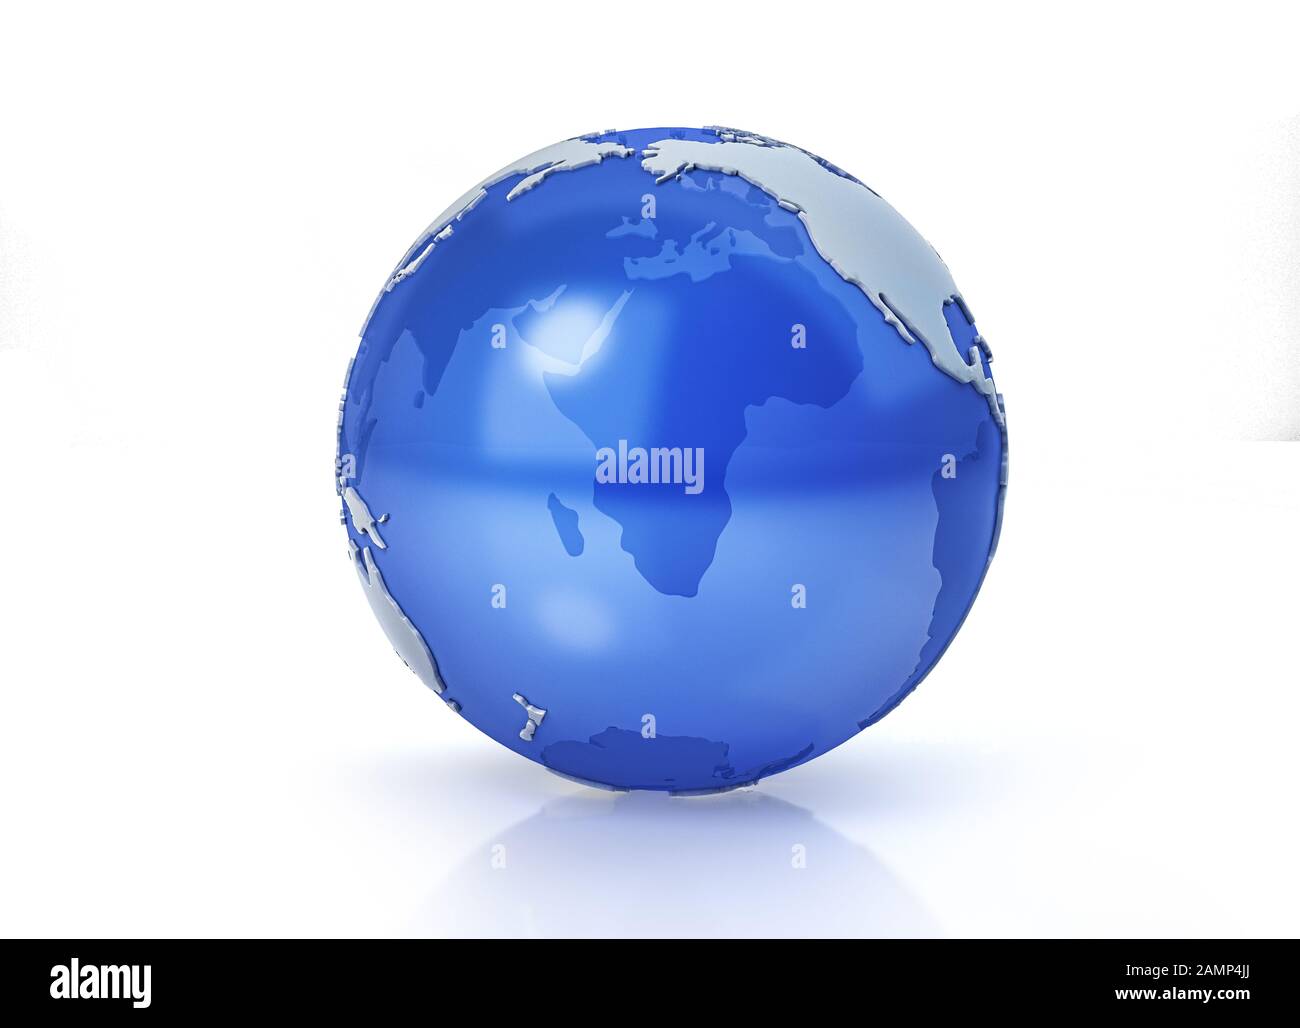 Earth globe stylized. Grey continents in relief. With transparent seas to reveal continents on the other side. On white background. Pacific view. Stock Photo